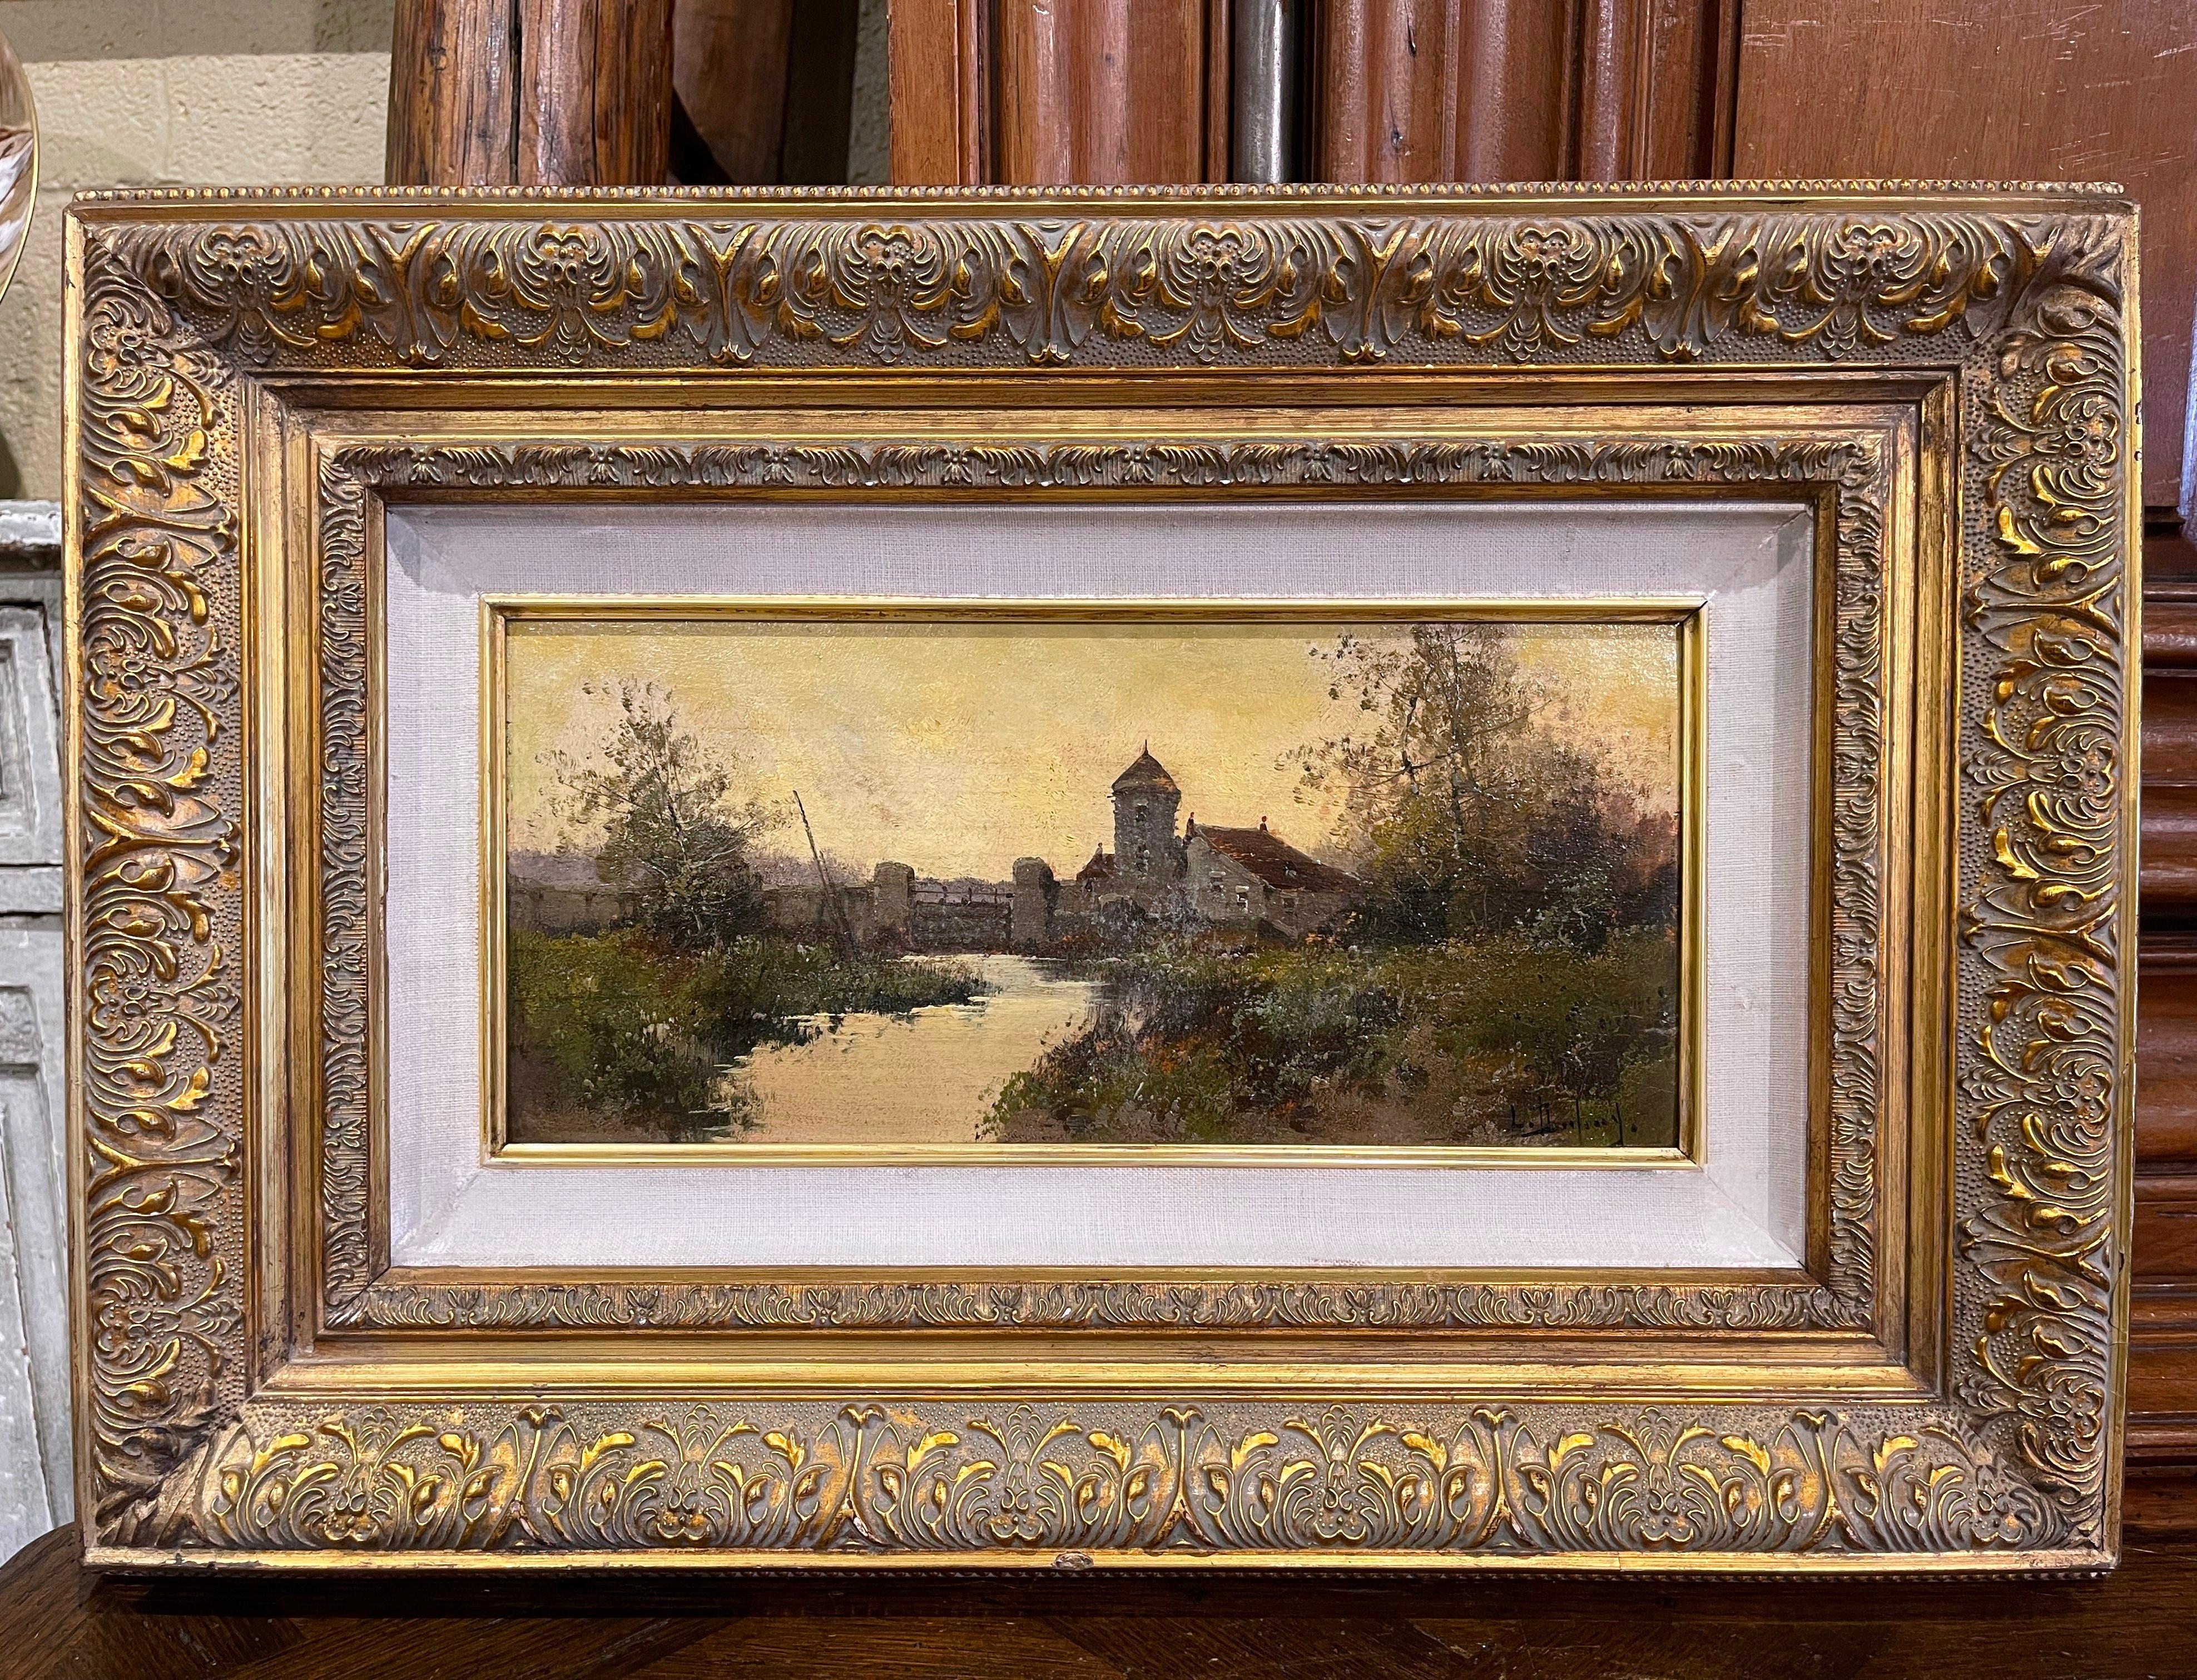 Set of 3 Framed Oil on Board Paintings Signed Leon Dupuy for E. Galien-Laloue For Sale 2